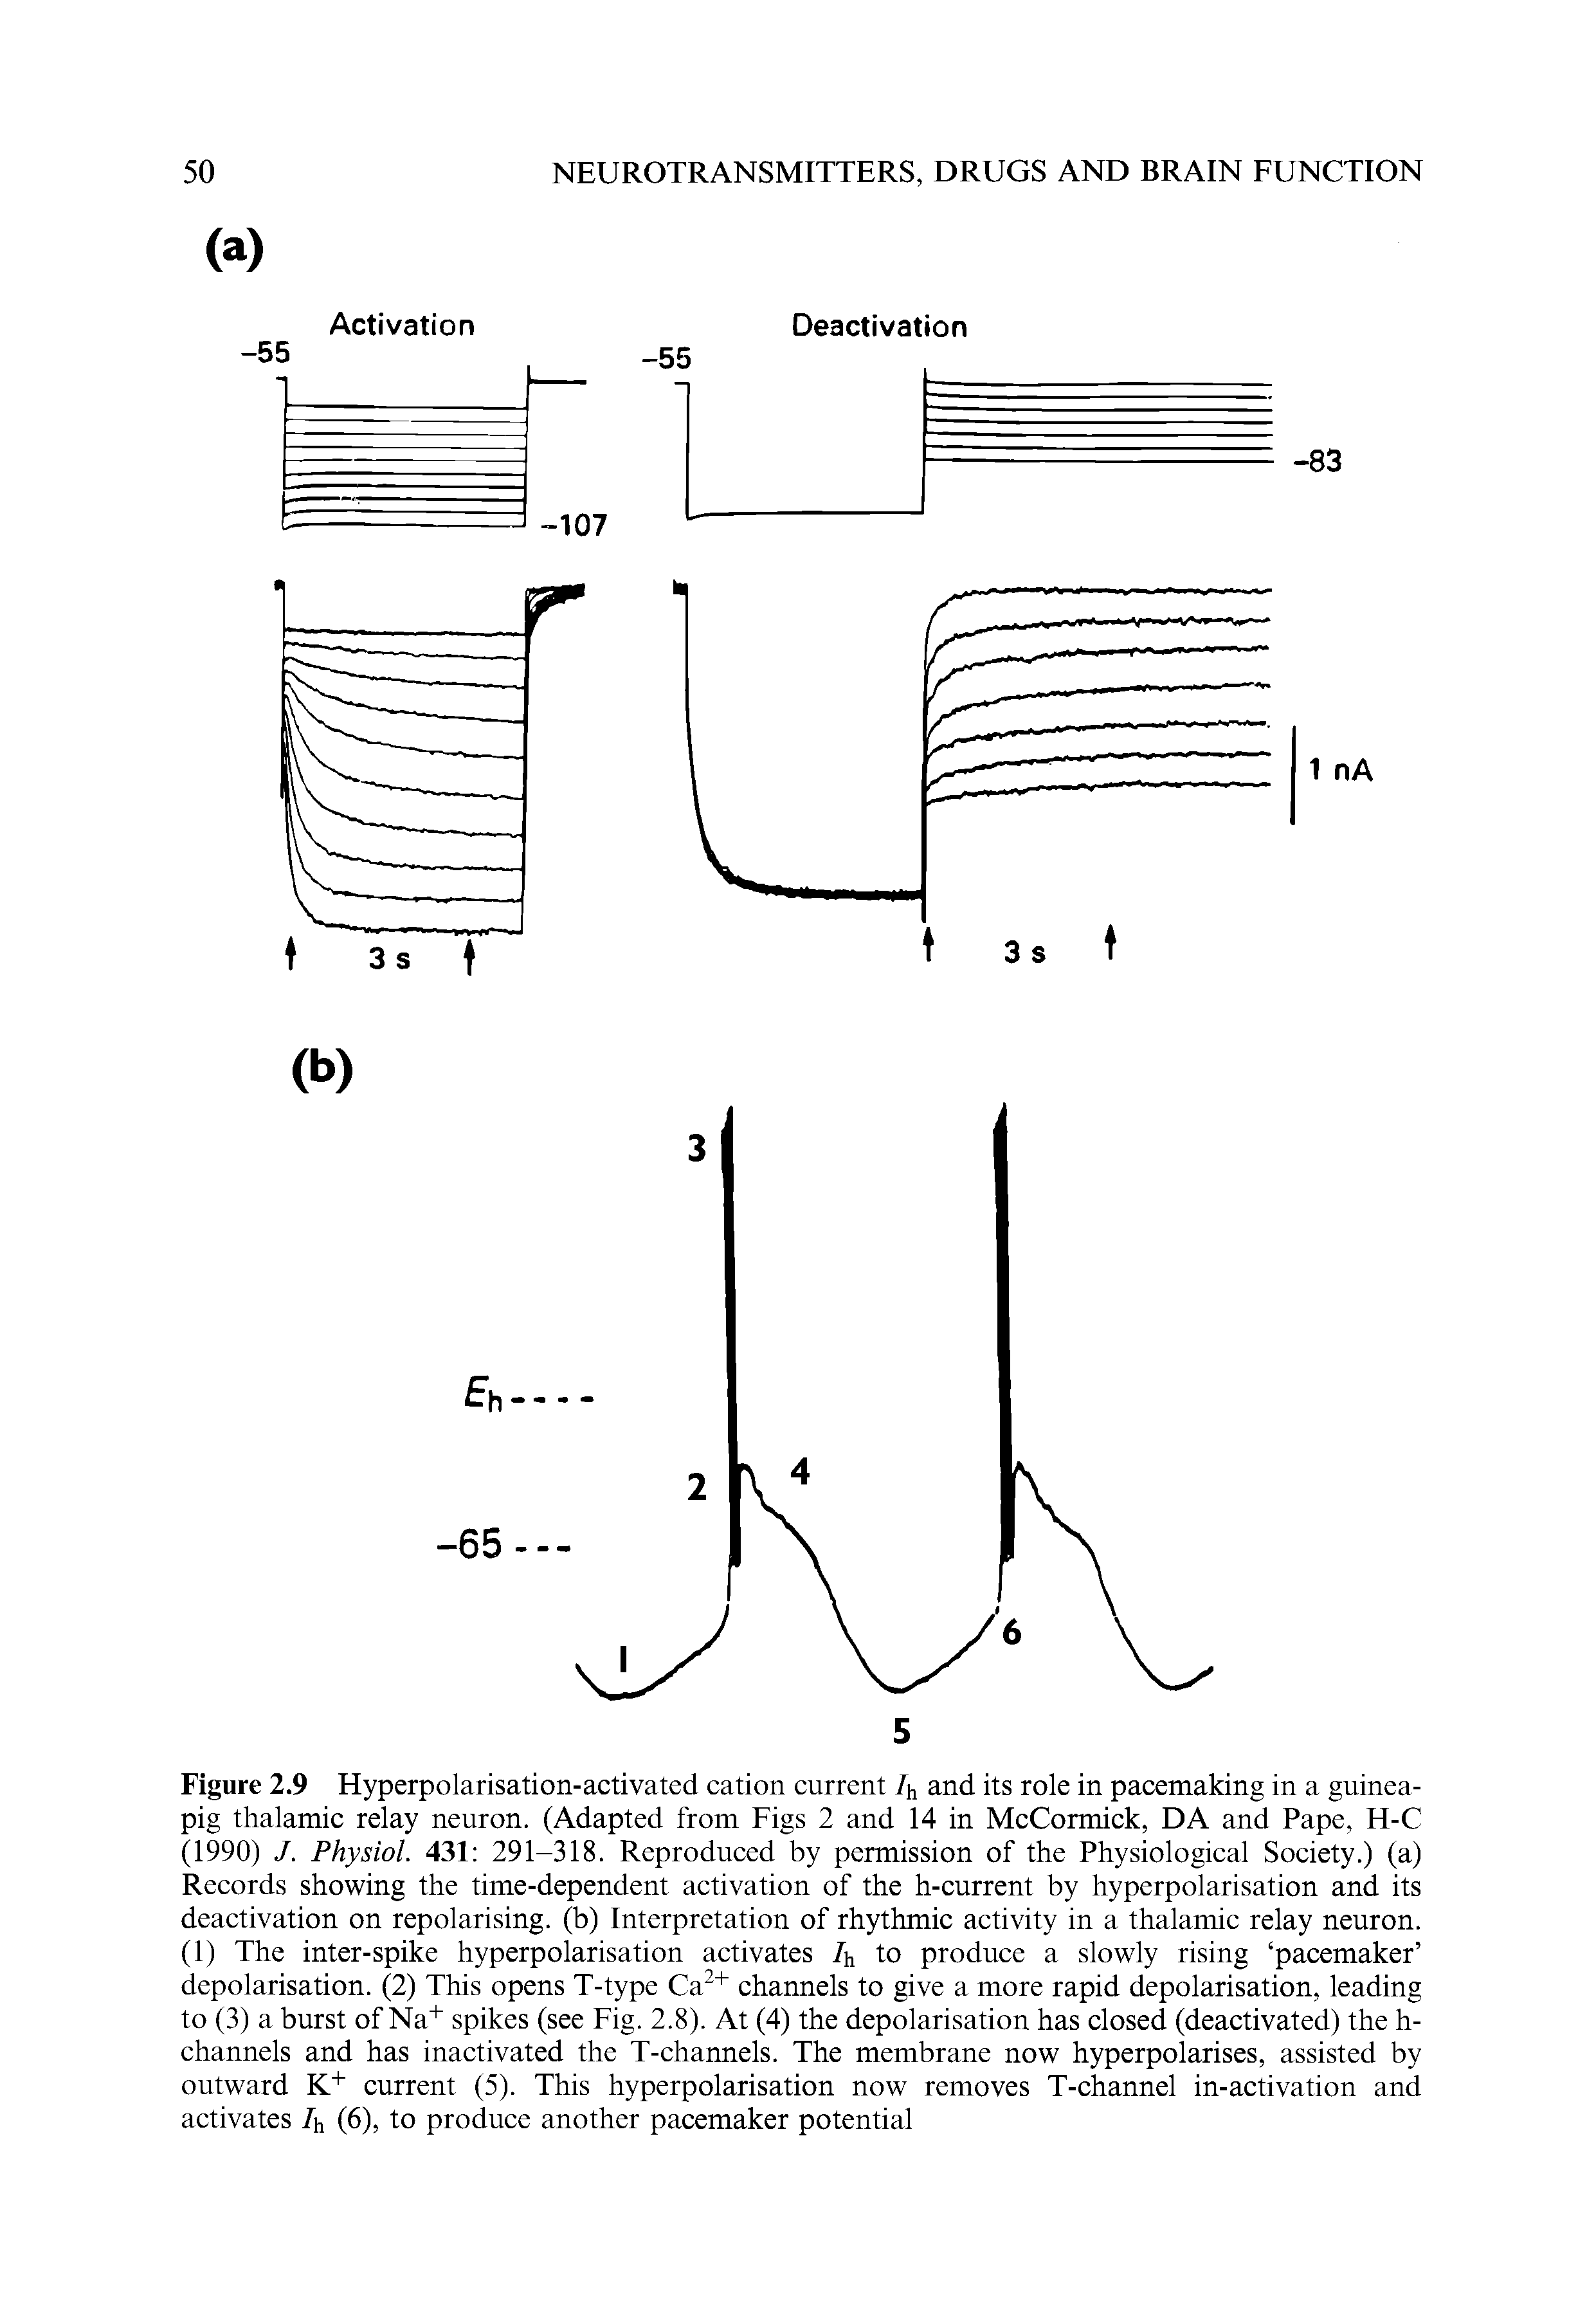 Figure 2.9 Hyperpolarisation-activated cation current 4 and its role in pacemaking in a guinea-pig thalamic relay neuron. (Adapted from Figs 2 and 14 in McCormick, DA and Pape, H-C (1990) J. Physiol. 431 291-318. Reproduced by permission of the Physiological Society.) (a) Records showing the time-dependent activation of the h-current by hyperpolarisation and its deactivation on repolarising, (b) Interpretation of rhythmic activity in a thalamic relay neuron. (1) The inter-spike hyperpolarisation activates 7h to produce a slowly rising pacemaker depolarisation. (2) This opens T-type Ca " channels to give a more rapid depolarisation, leading to (3) a burst of Na" spikes (see Fig. 2.8). At (4) the depolarisation has closed (deactivated) the h-channels and has inactivated the T-channels. The membrane now hyperpolarises, assisted by outward K+ current (5). This hyperpolarisation now removes T-channel in-activation and activates 7h (6), to produce another pacemaker potential...